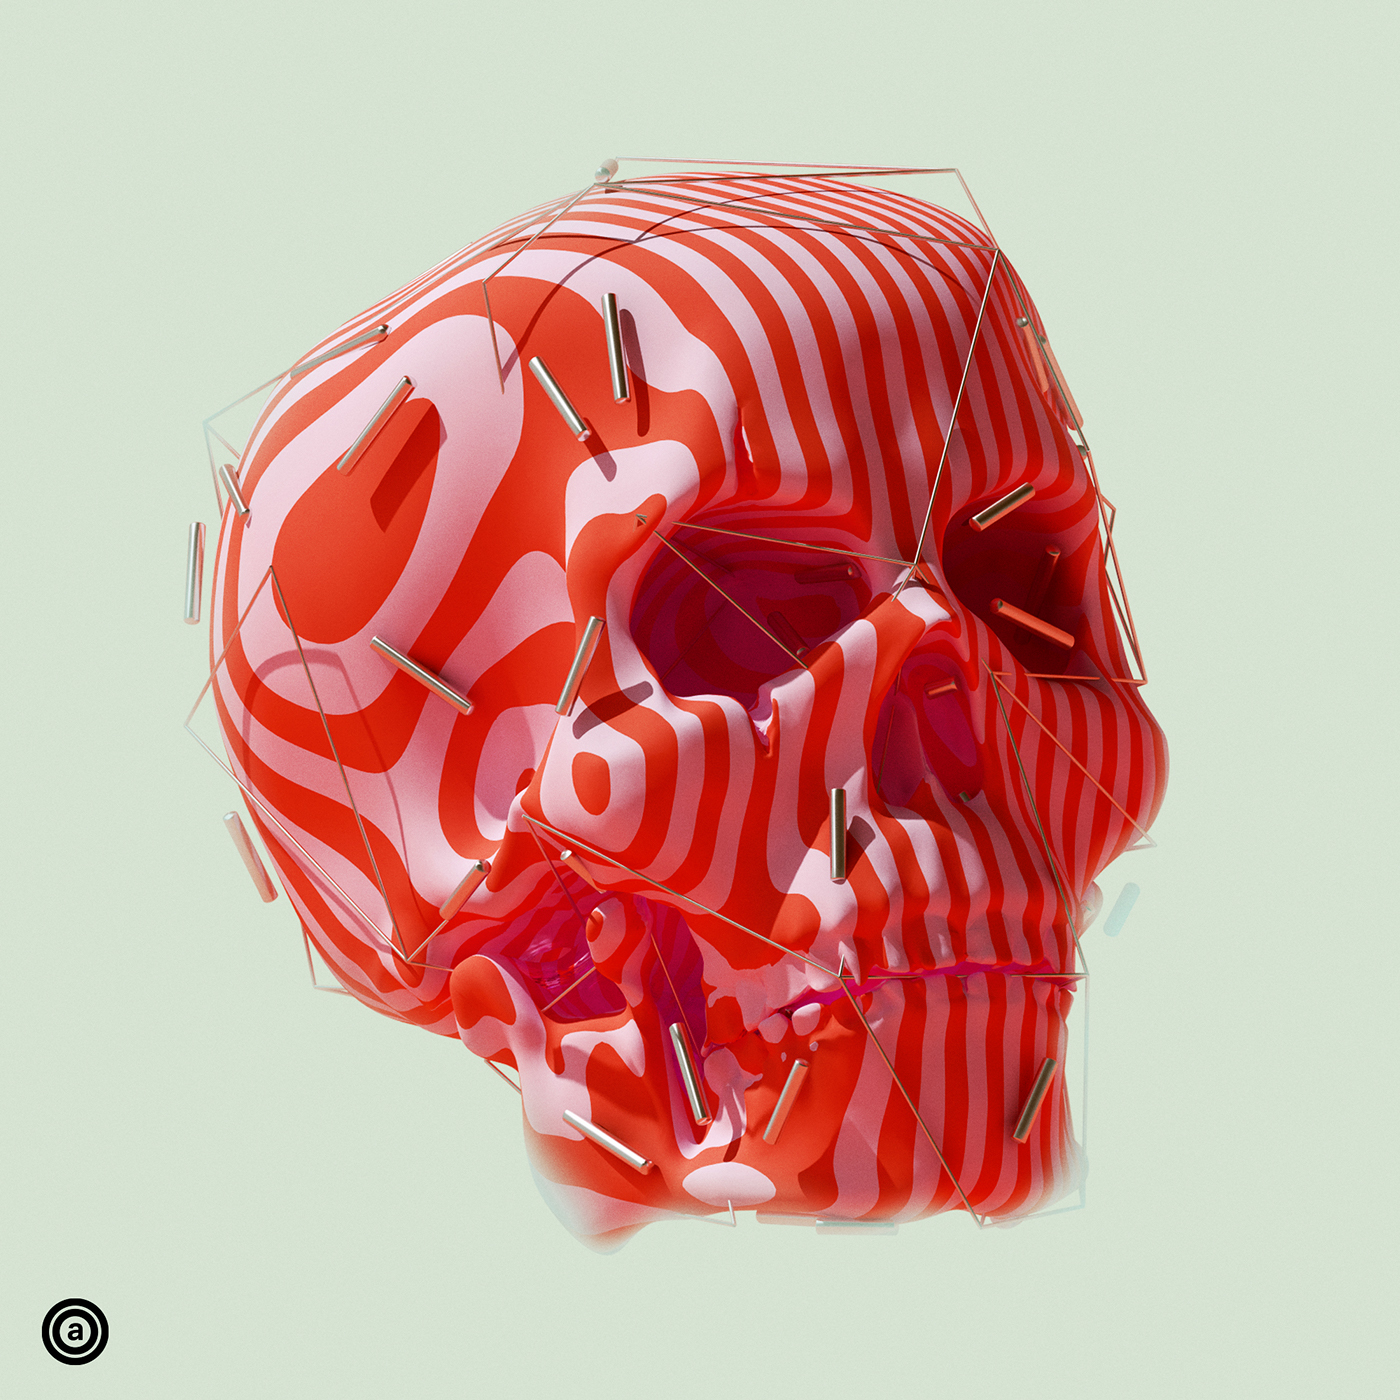 Sebastian andaur daily Project vray cinema 4d instagram social colorful skull Candy color Santiago chile Ps25Under25